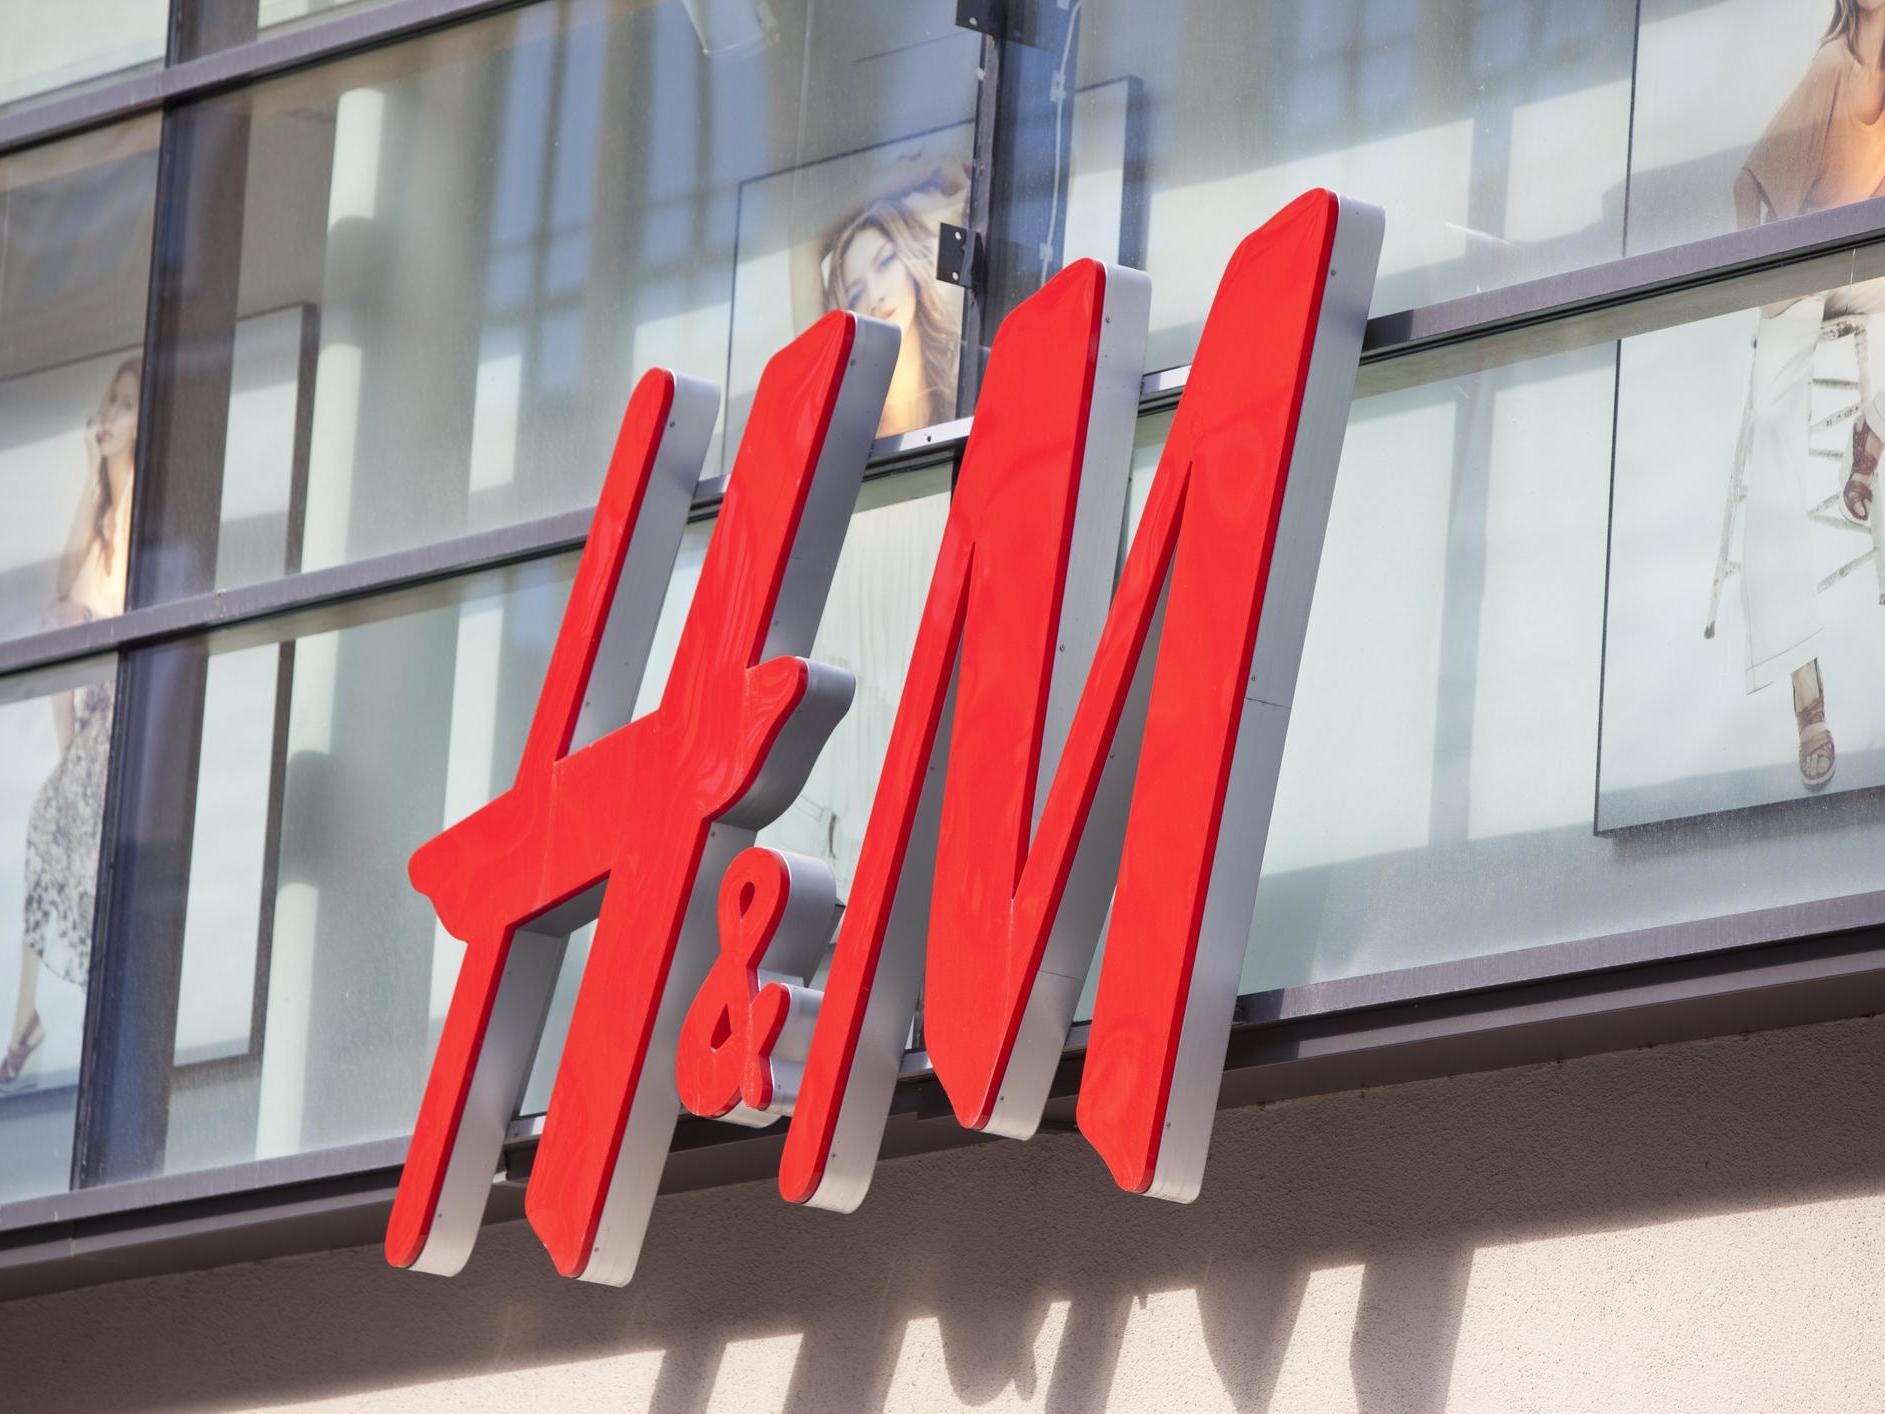 H&M accused of ‘greenwashing’ over plans to make clothes from sustainable fabric